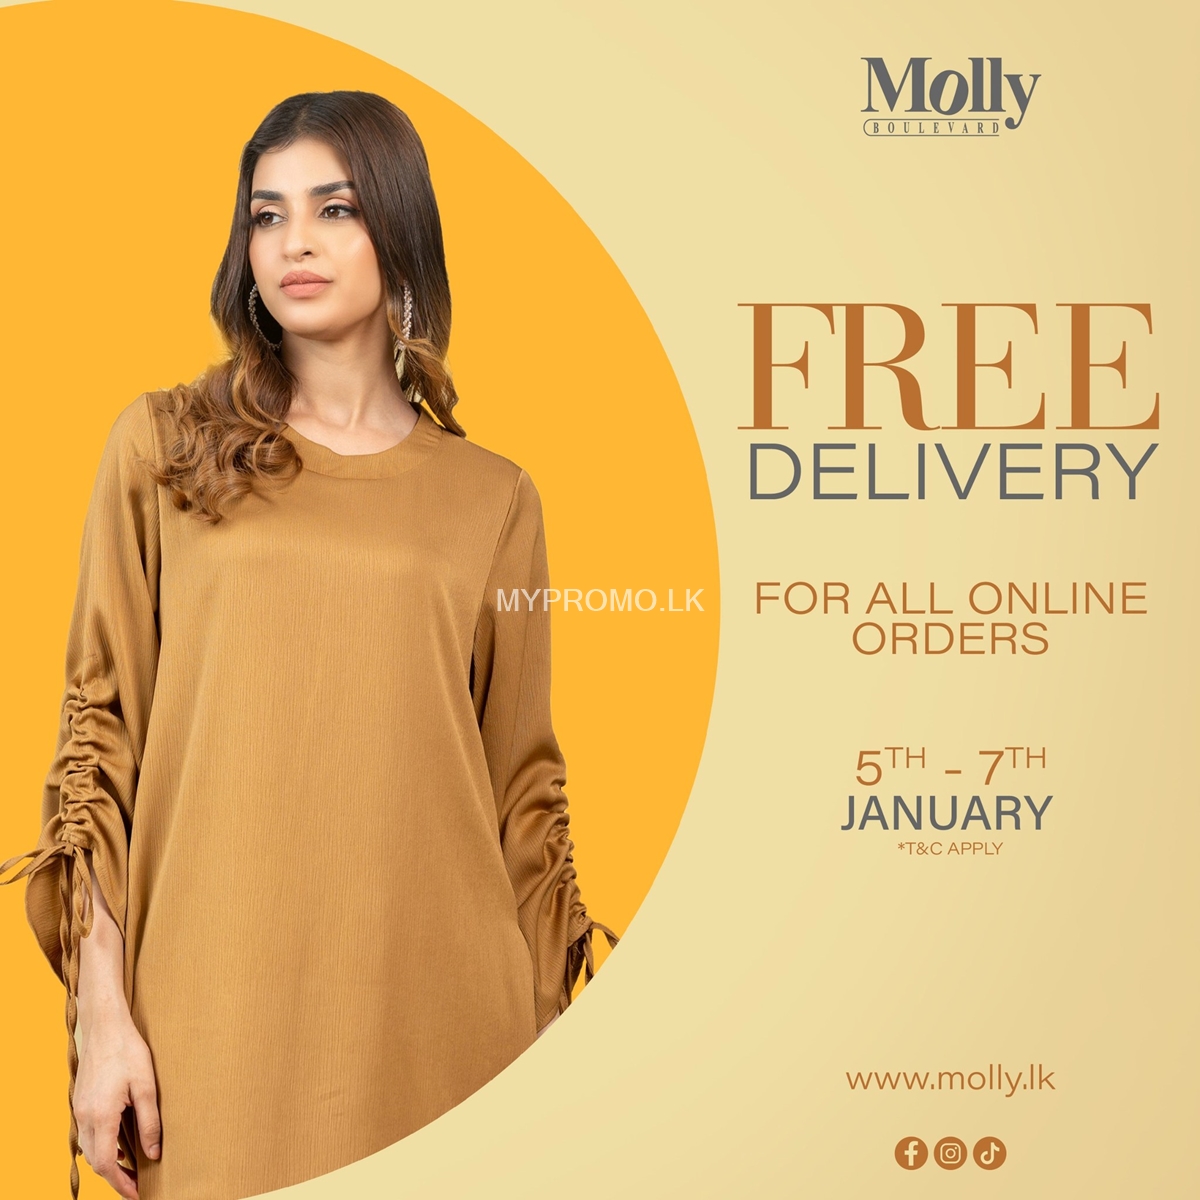 FREE DELIVERY for all your online purchases at Molly Boulevard